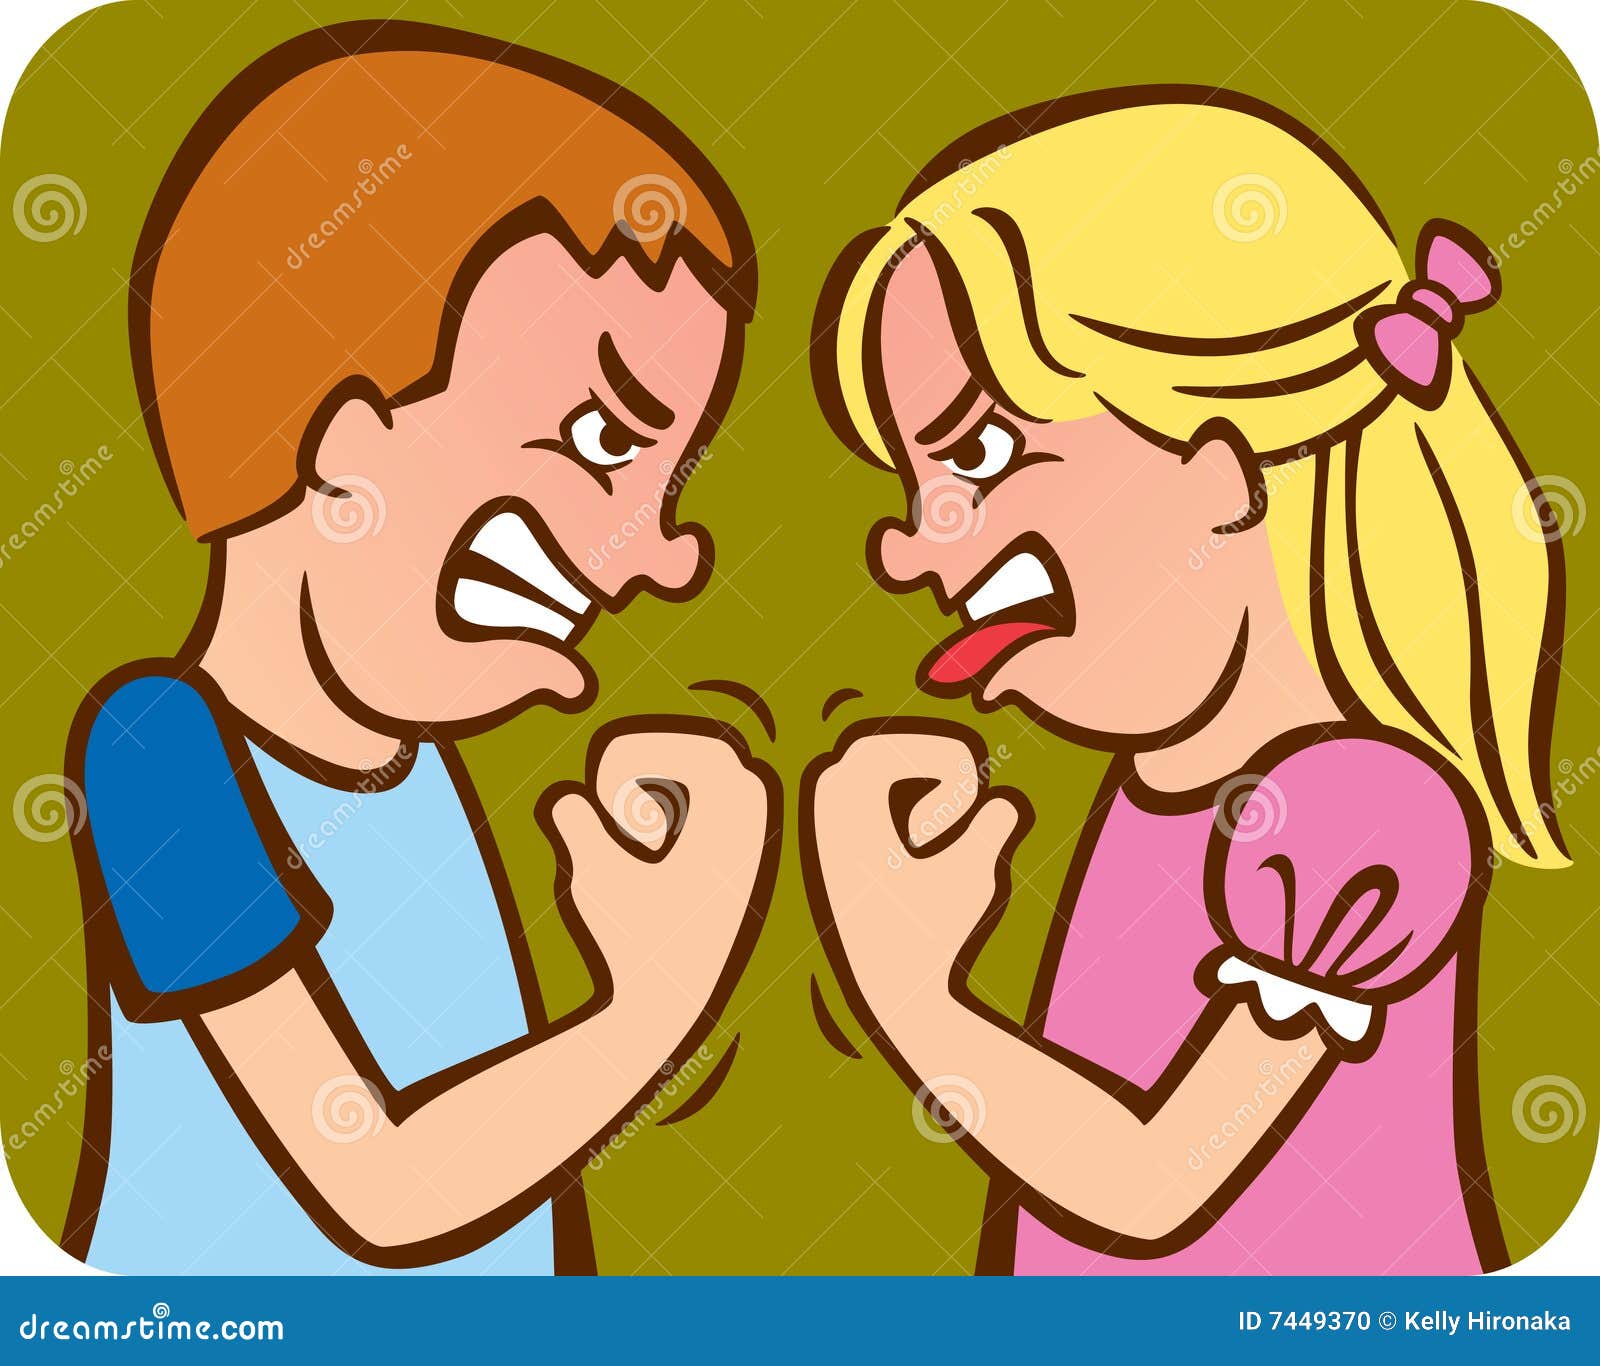 boy and girl fighting clipart - photo #33